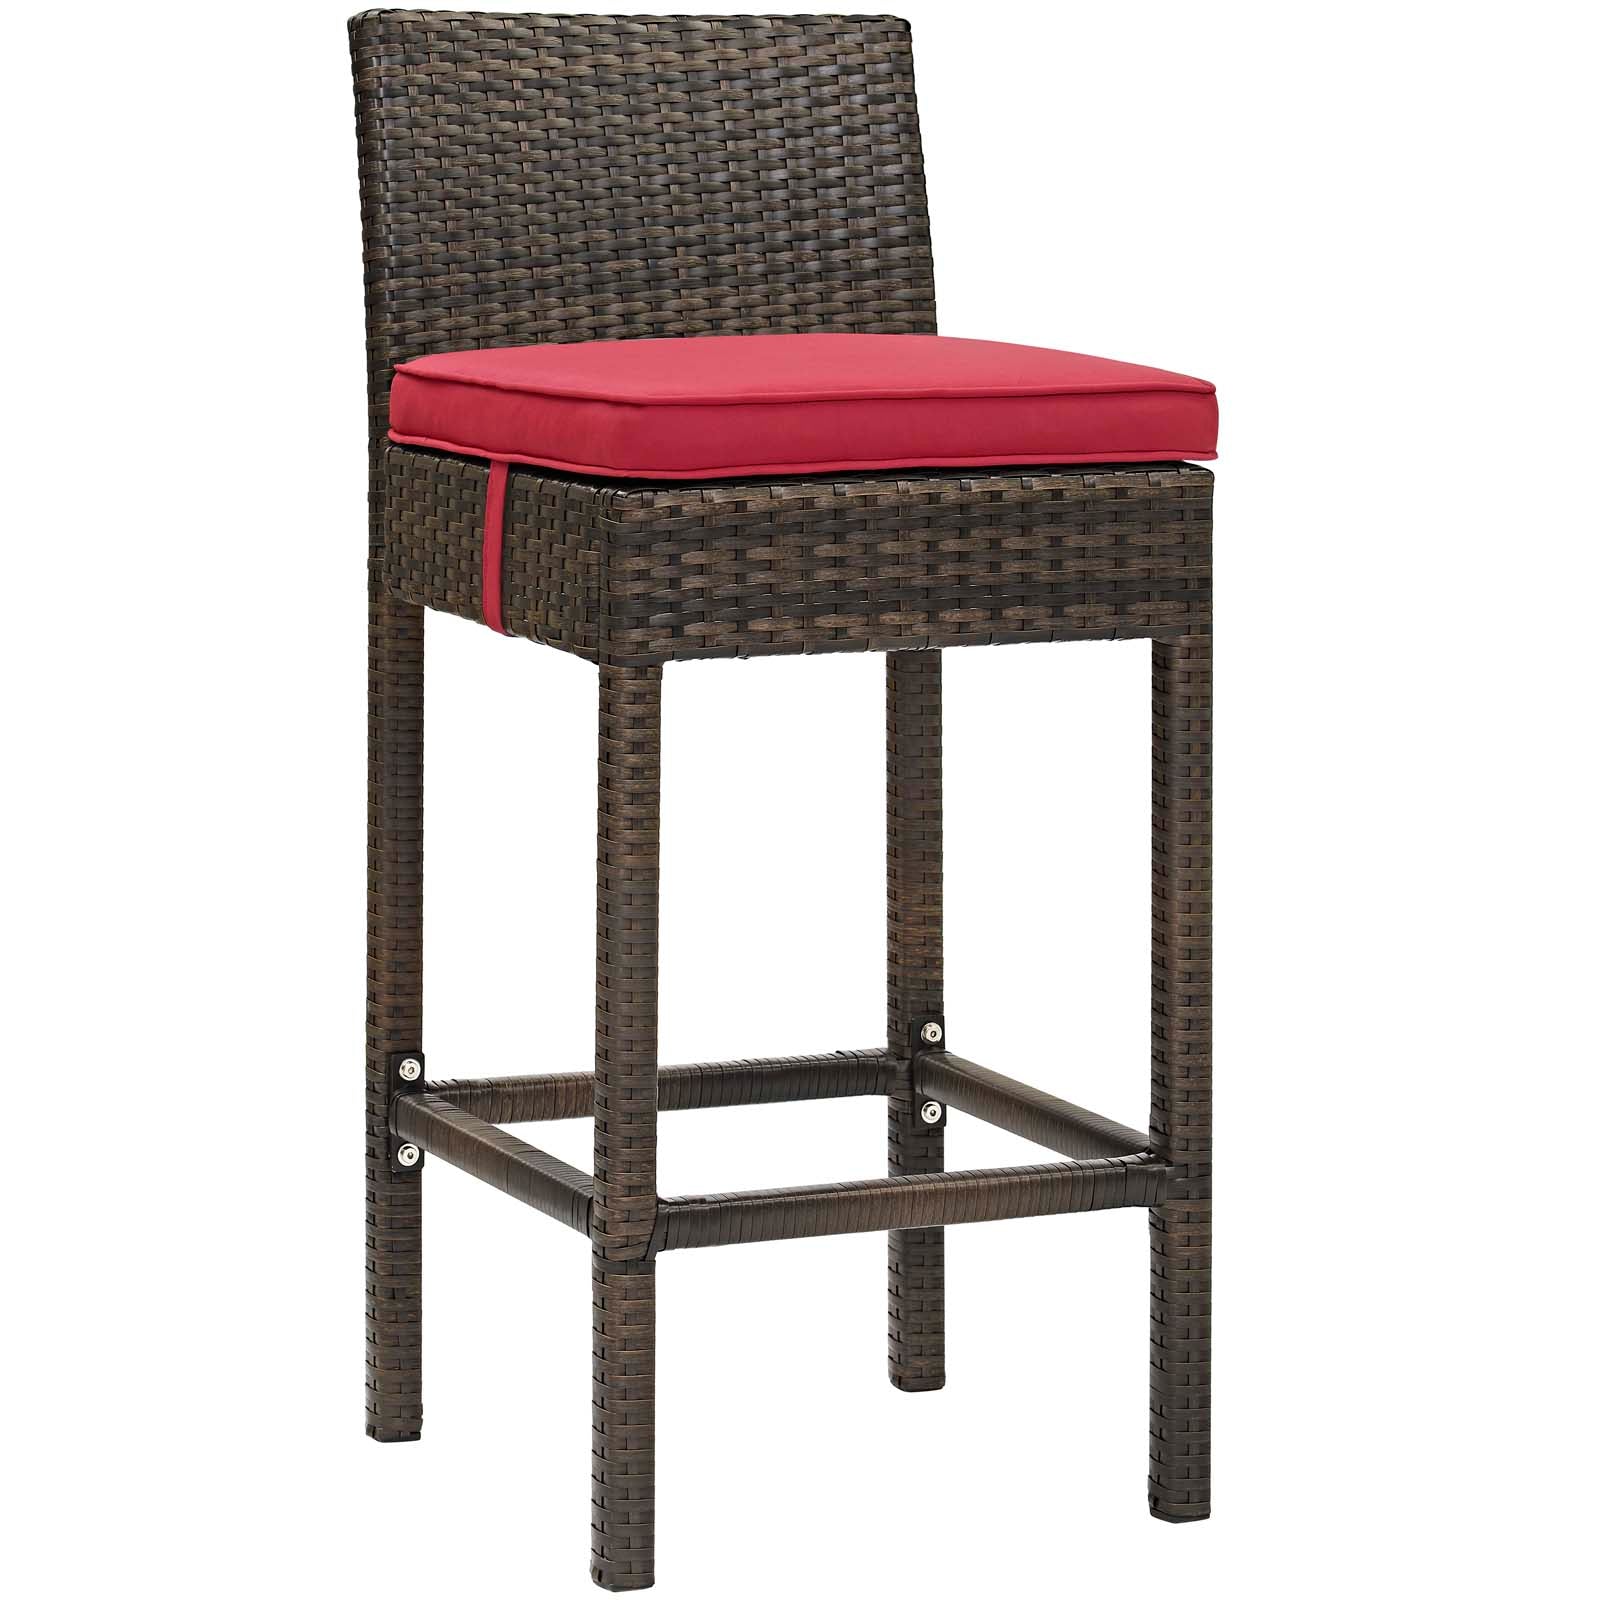 Modway Outdoor Barstools - Conduit Bar Stool Outdoor Patio Wicker Rattan Set of 4 Brown Red